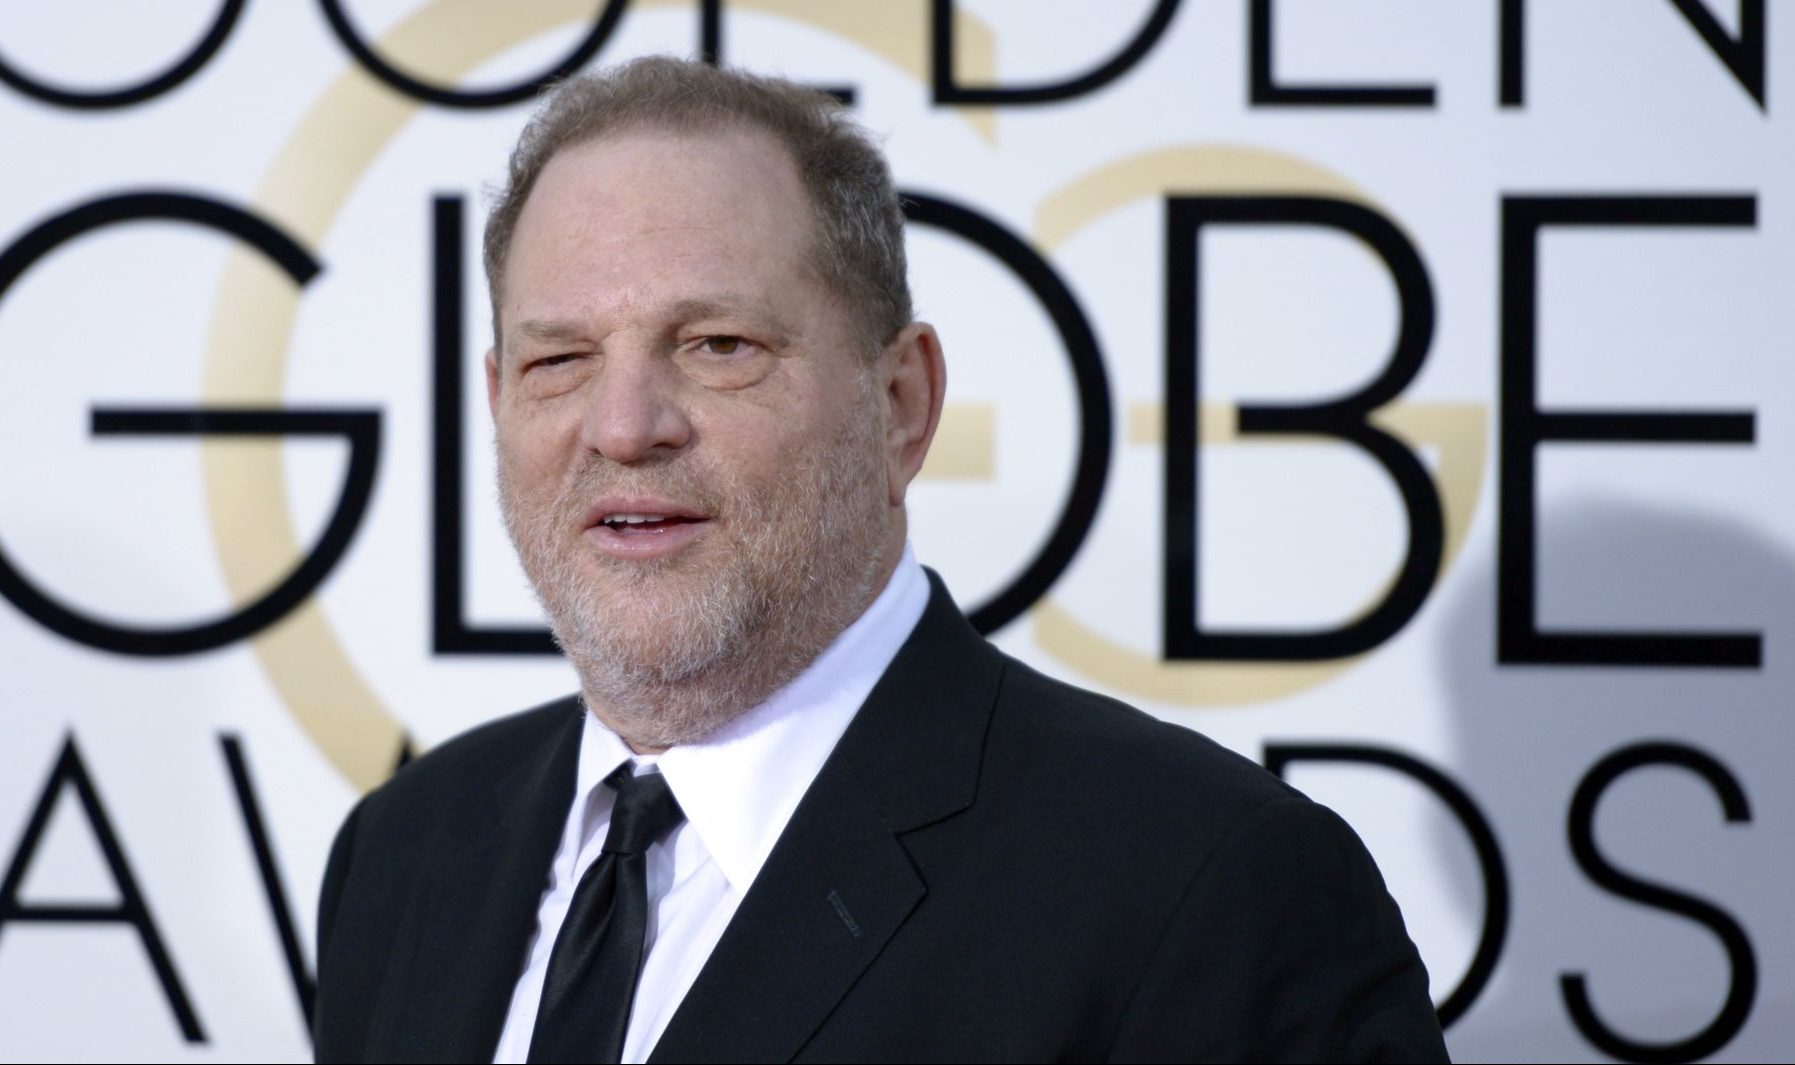 epa06263723 (FILE) - Harvey Weinstein arrives for the 73rd Annual Golden Globe Awards at the Beverly Hilton Hotel in Beverly Hills, California, USA, 10 January 2016 (reissued 13 October 2017). According to media reports on 09 October 2017, Hollywood producer Harvey Weinstein was fired from The Weinstein Company, which he co-founded, after additional information surfaced concerning his conduct amid accusations of decades of sexual harassment.  EPA/PAUL BUCK